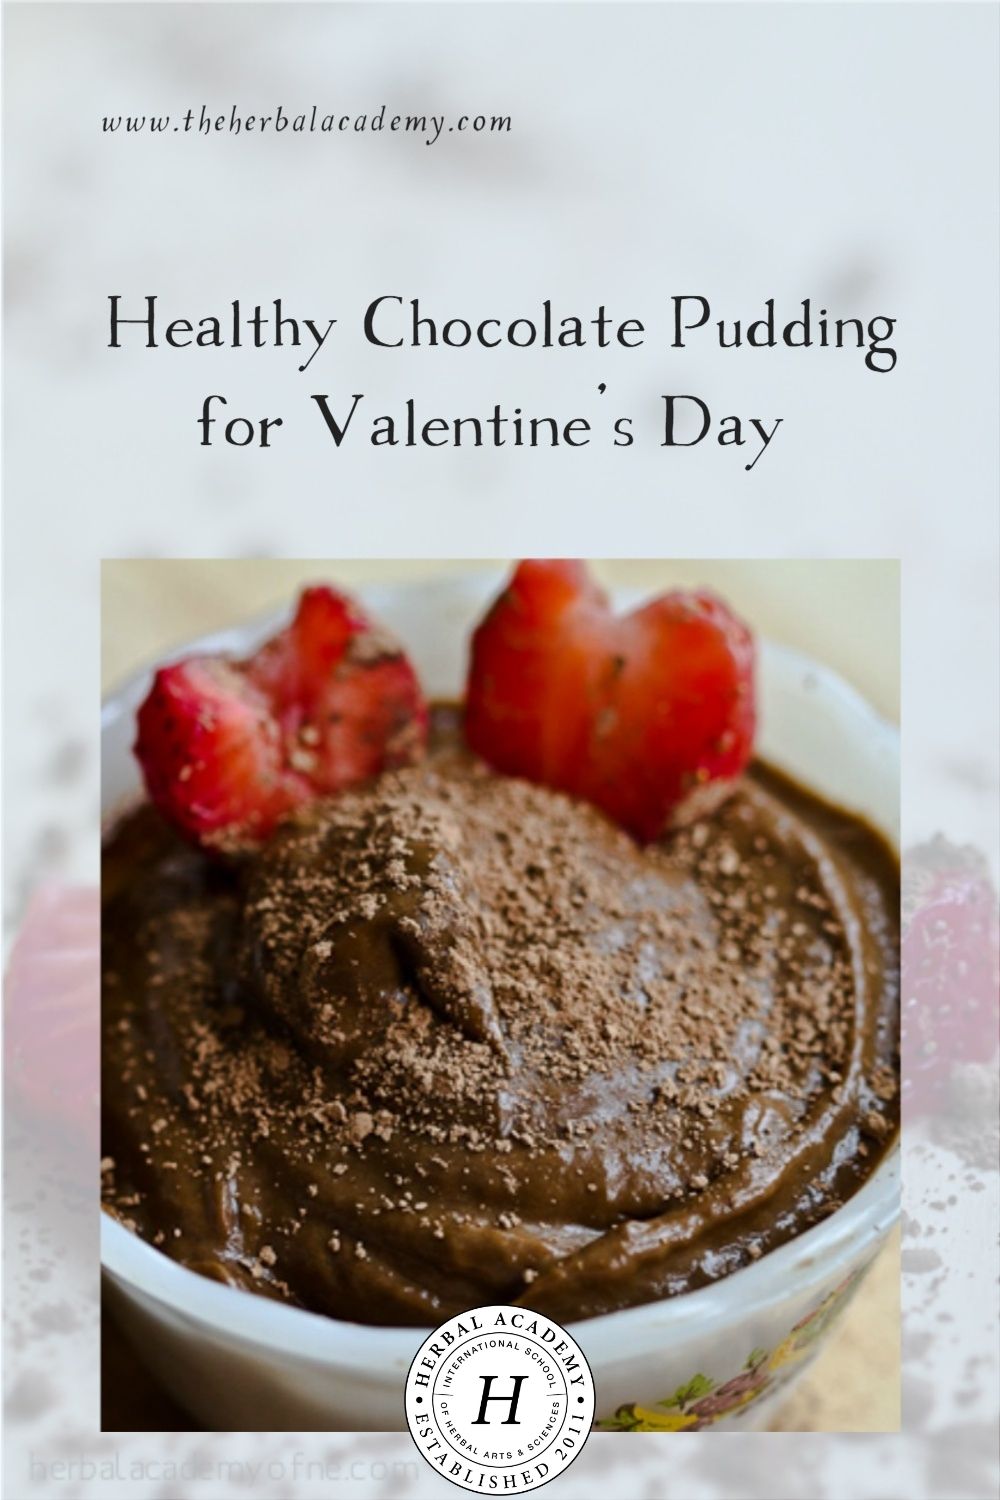 Healthy Chocolate Pudding for Valentine's Day | Herbal Academy | A raw vegan chocolate pudding for V-Day made with avocados and bananas. This rich, healthy chocolate pudding doesn't compromise taste either!